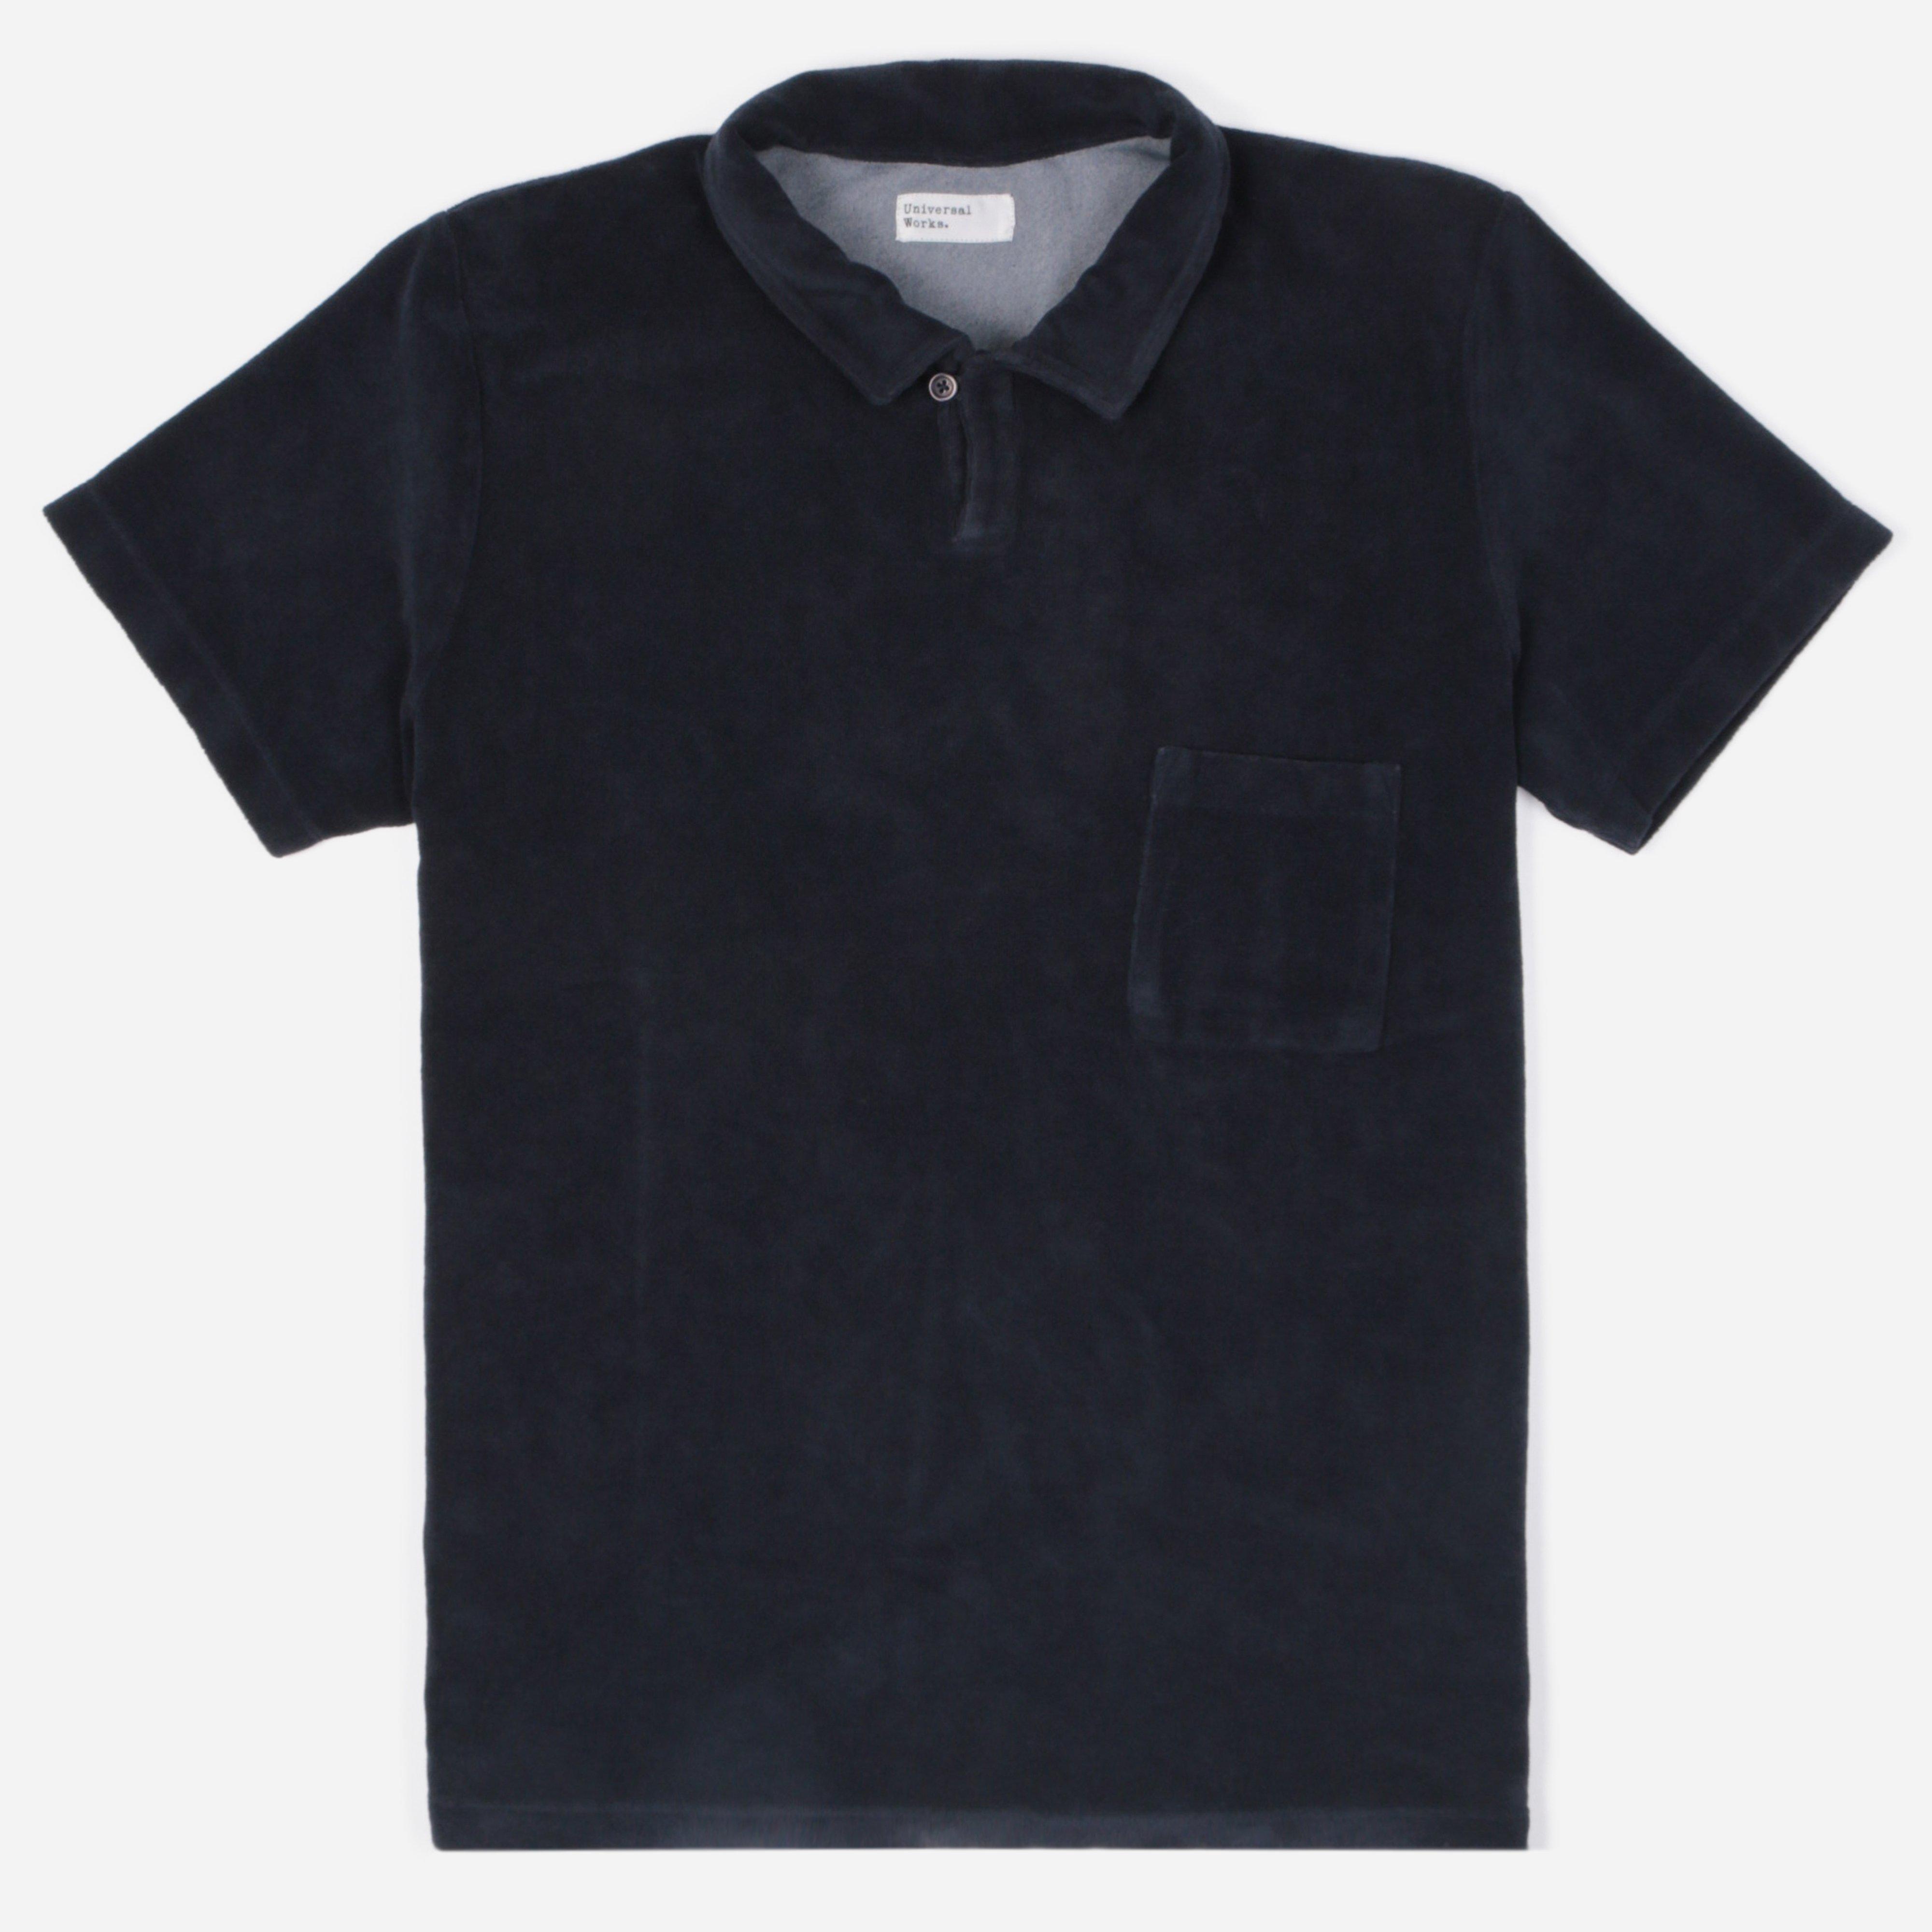 Universal Works Vacation Polo Shirt in Black for Men - Lyst